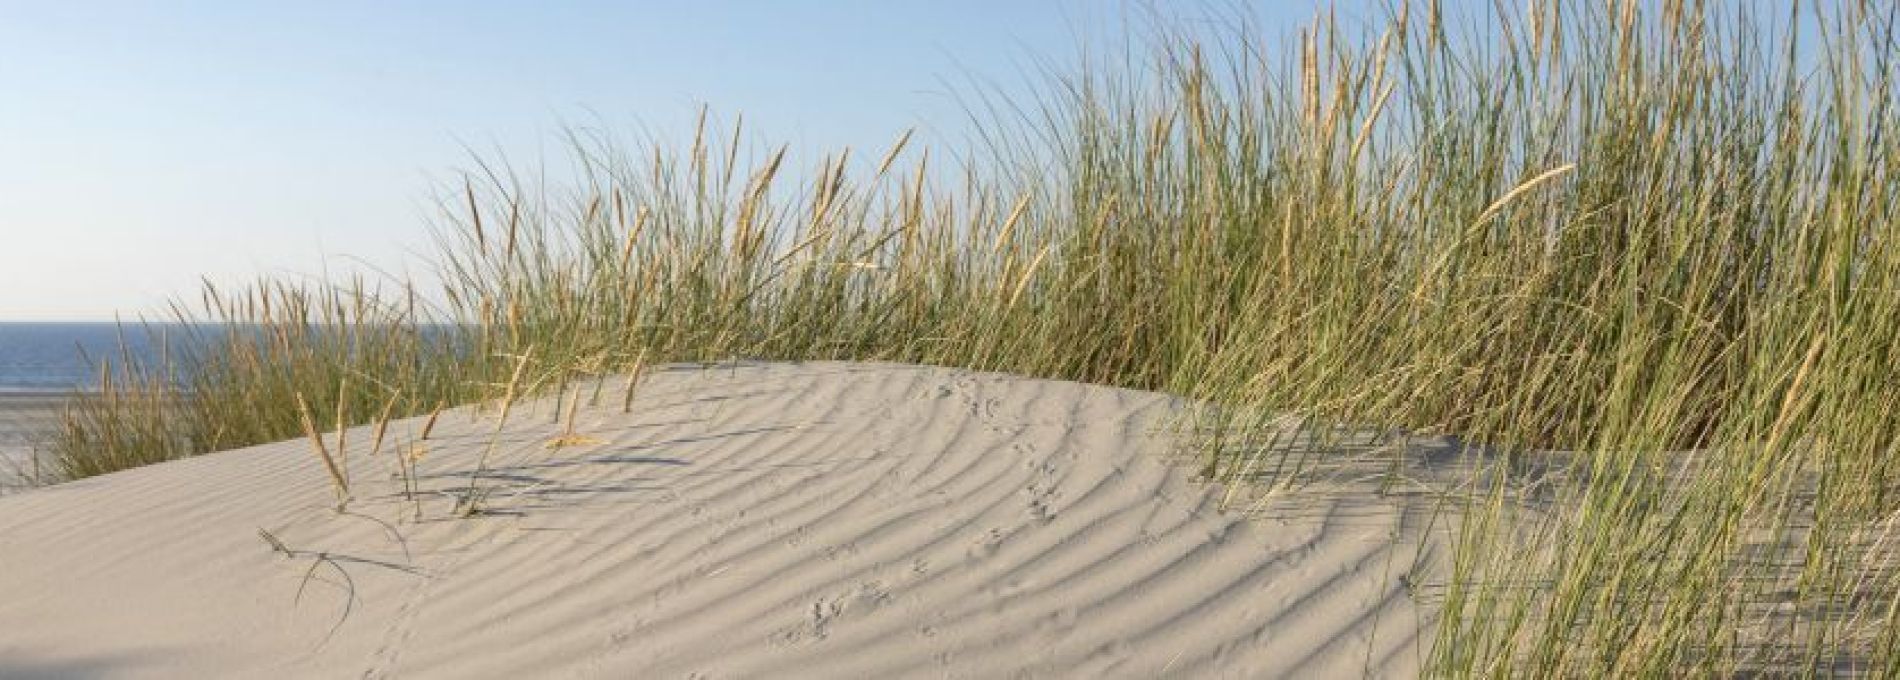 Frequently asked questions about activities and events on Ameland - Tourist Information Centre VVV Ameland.